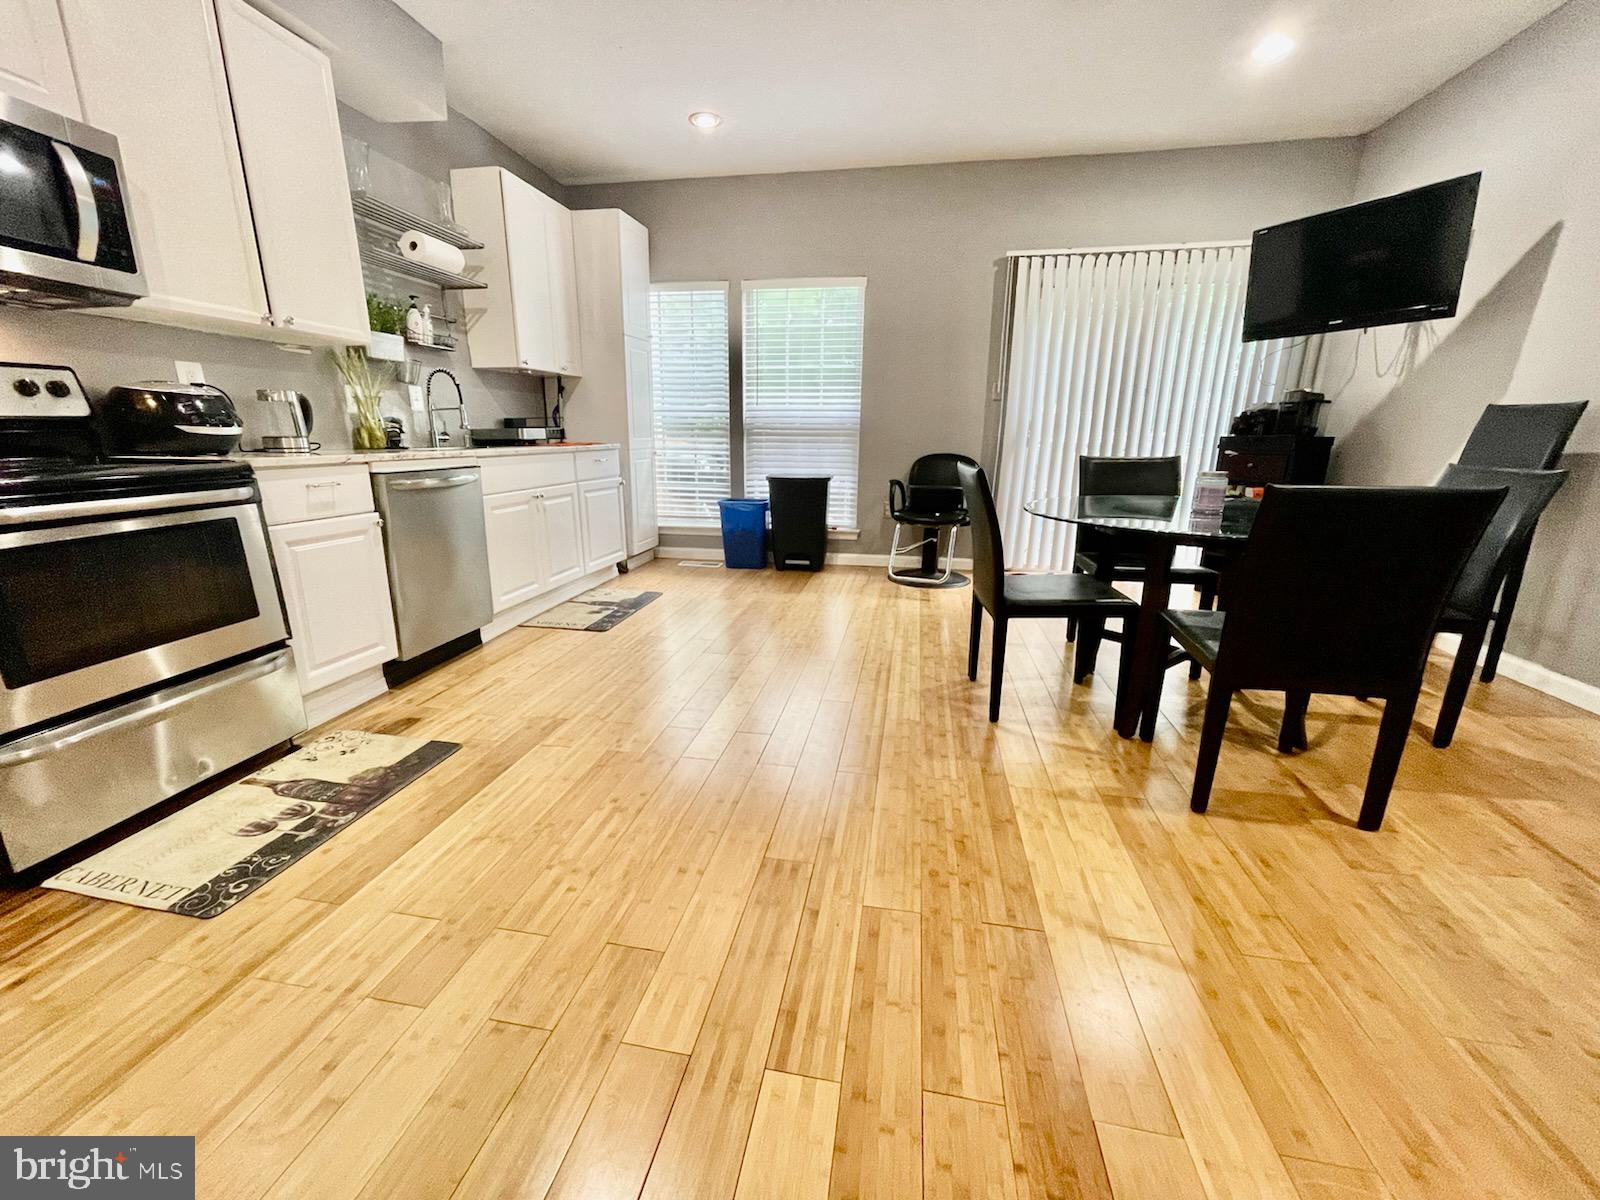 a open kitchen with stainless steel appliances kitchen island granite countertop a stove top oven a sink dishwasher and white cabinets with wooden floor